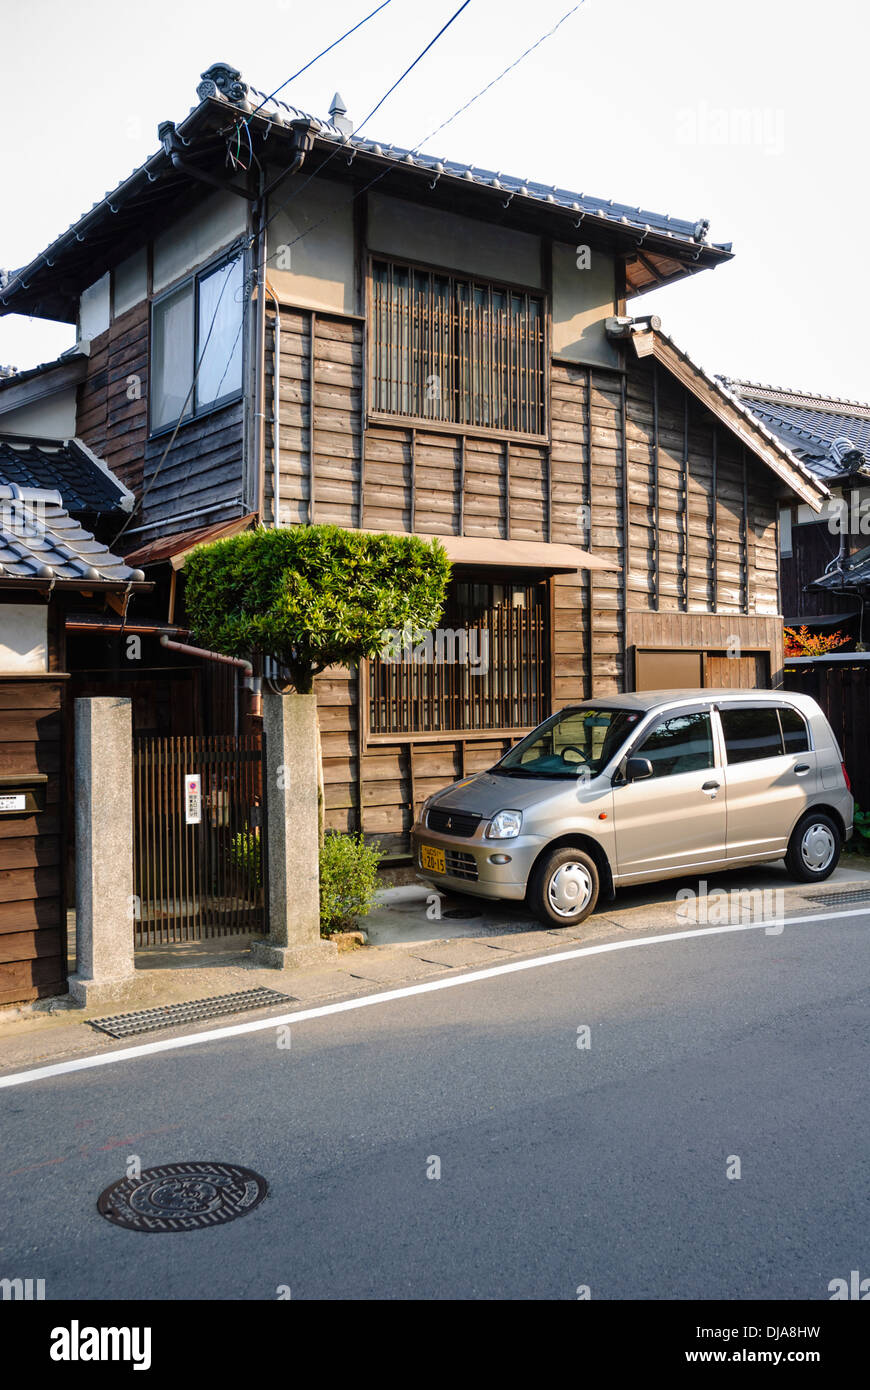 japan A house in